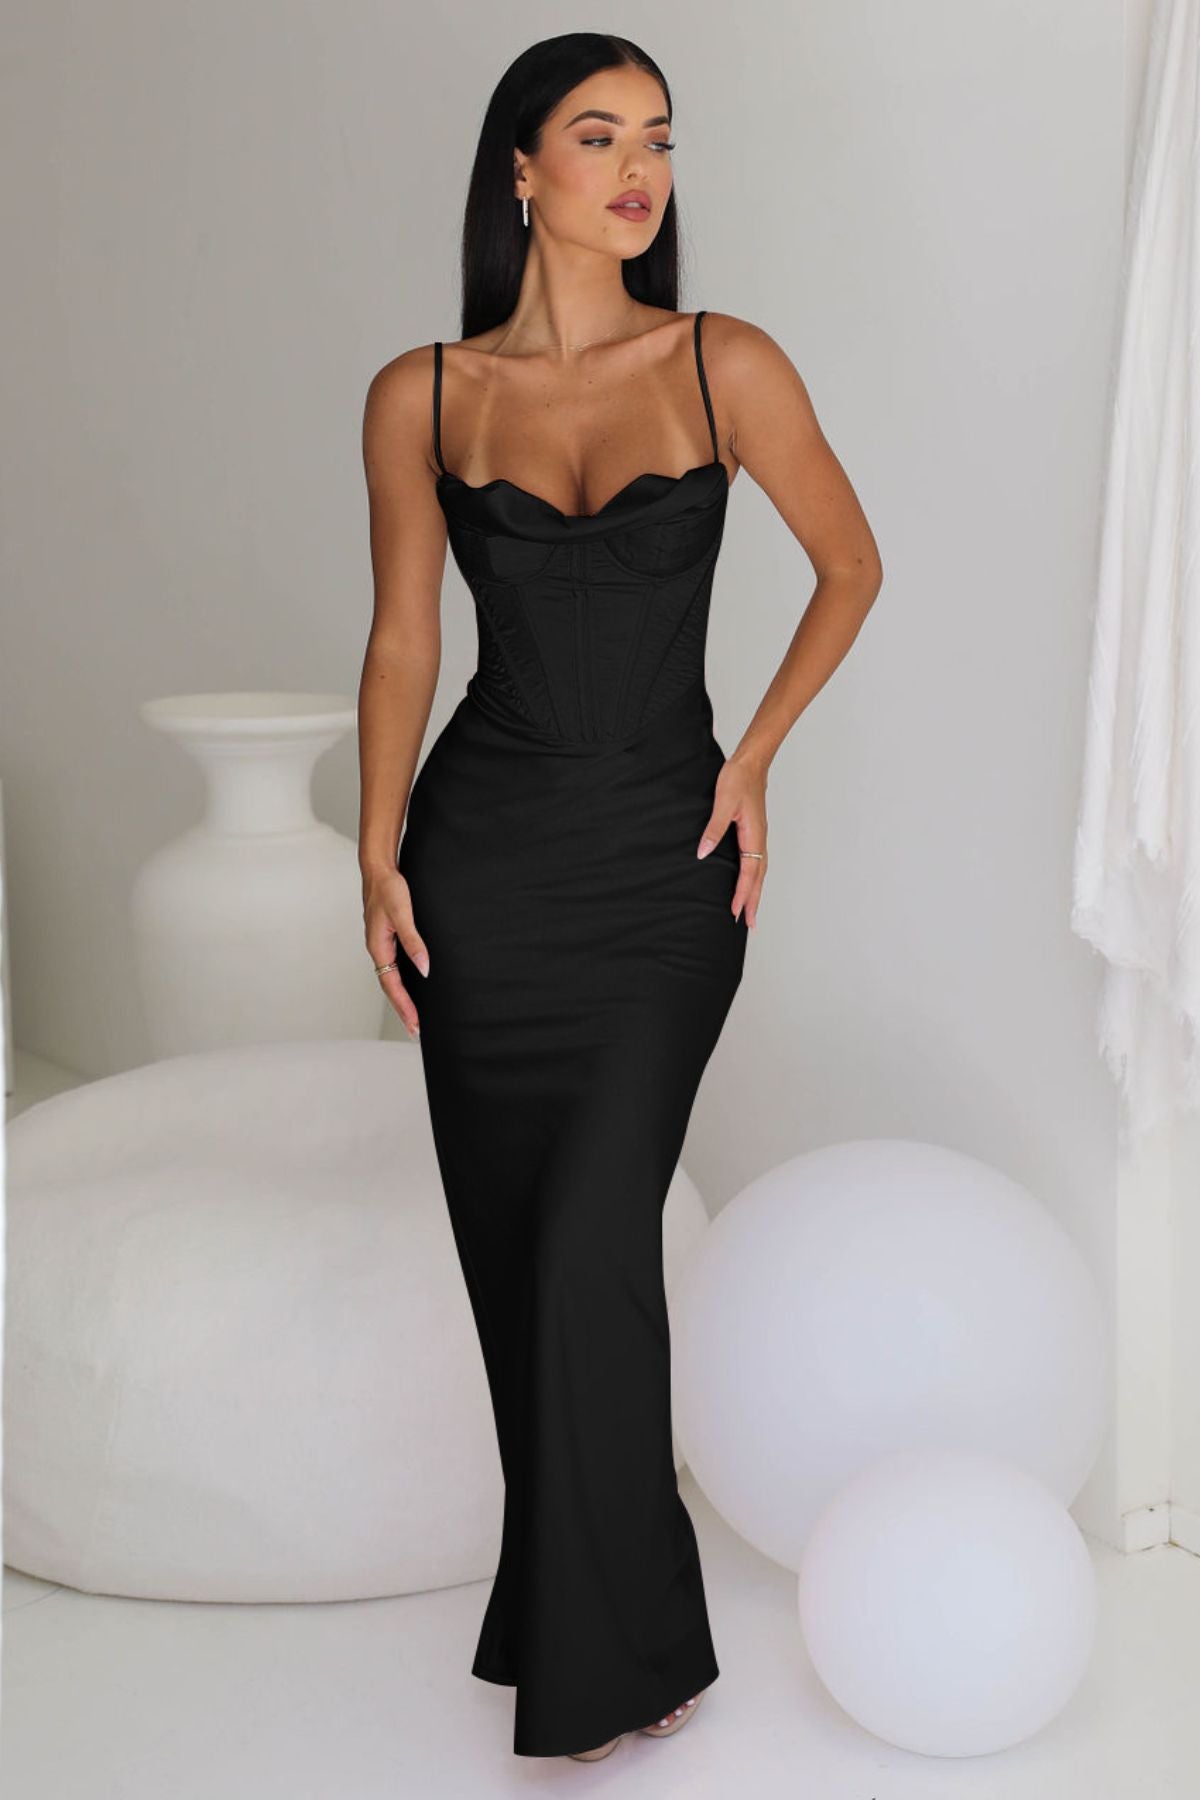 HOUSE OF CB Charmaine Corset Gown (Black) - RRP $389